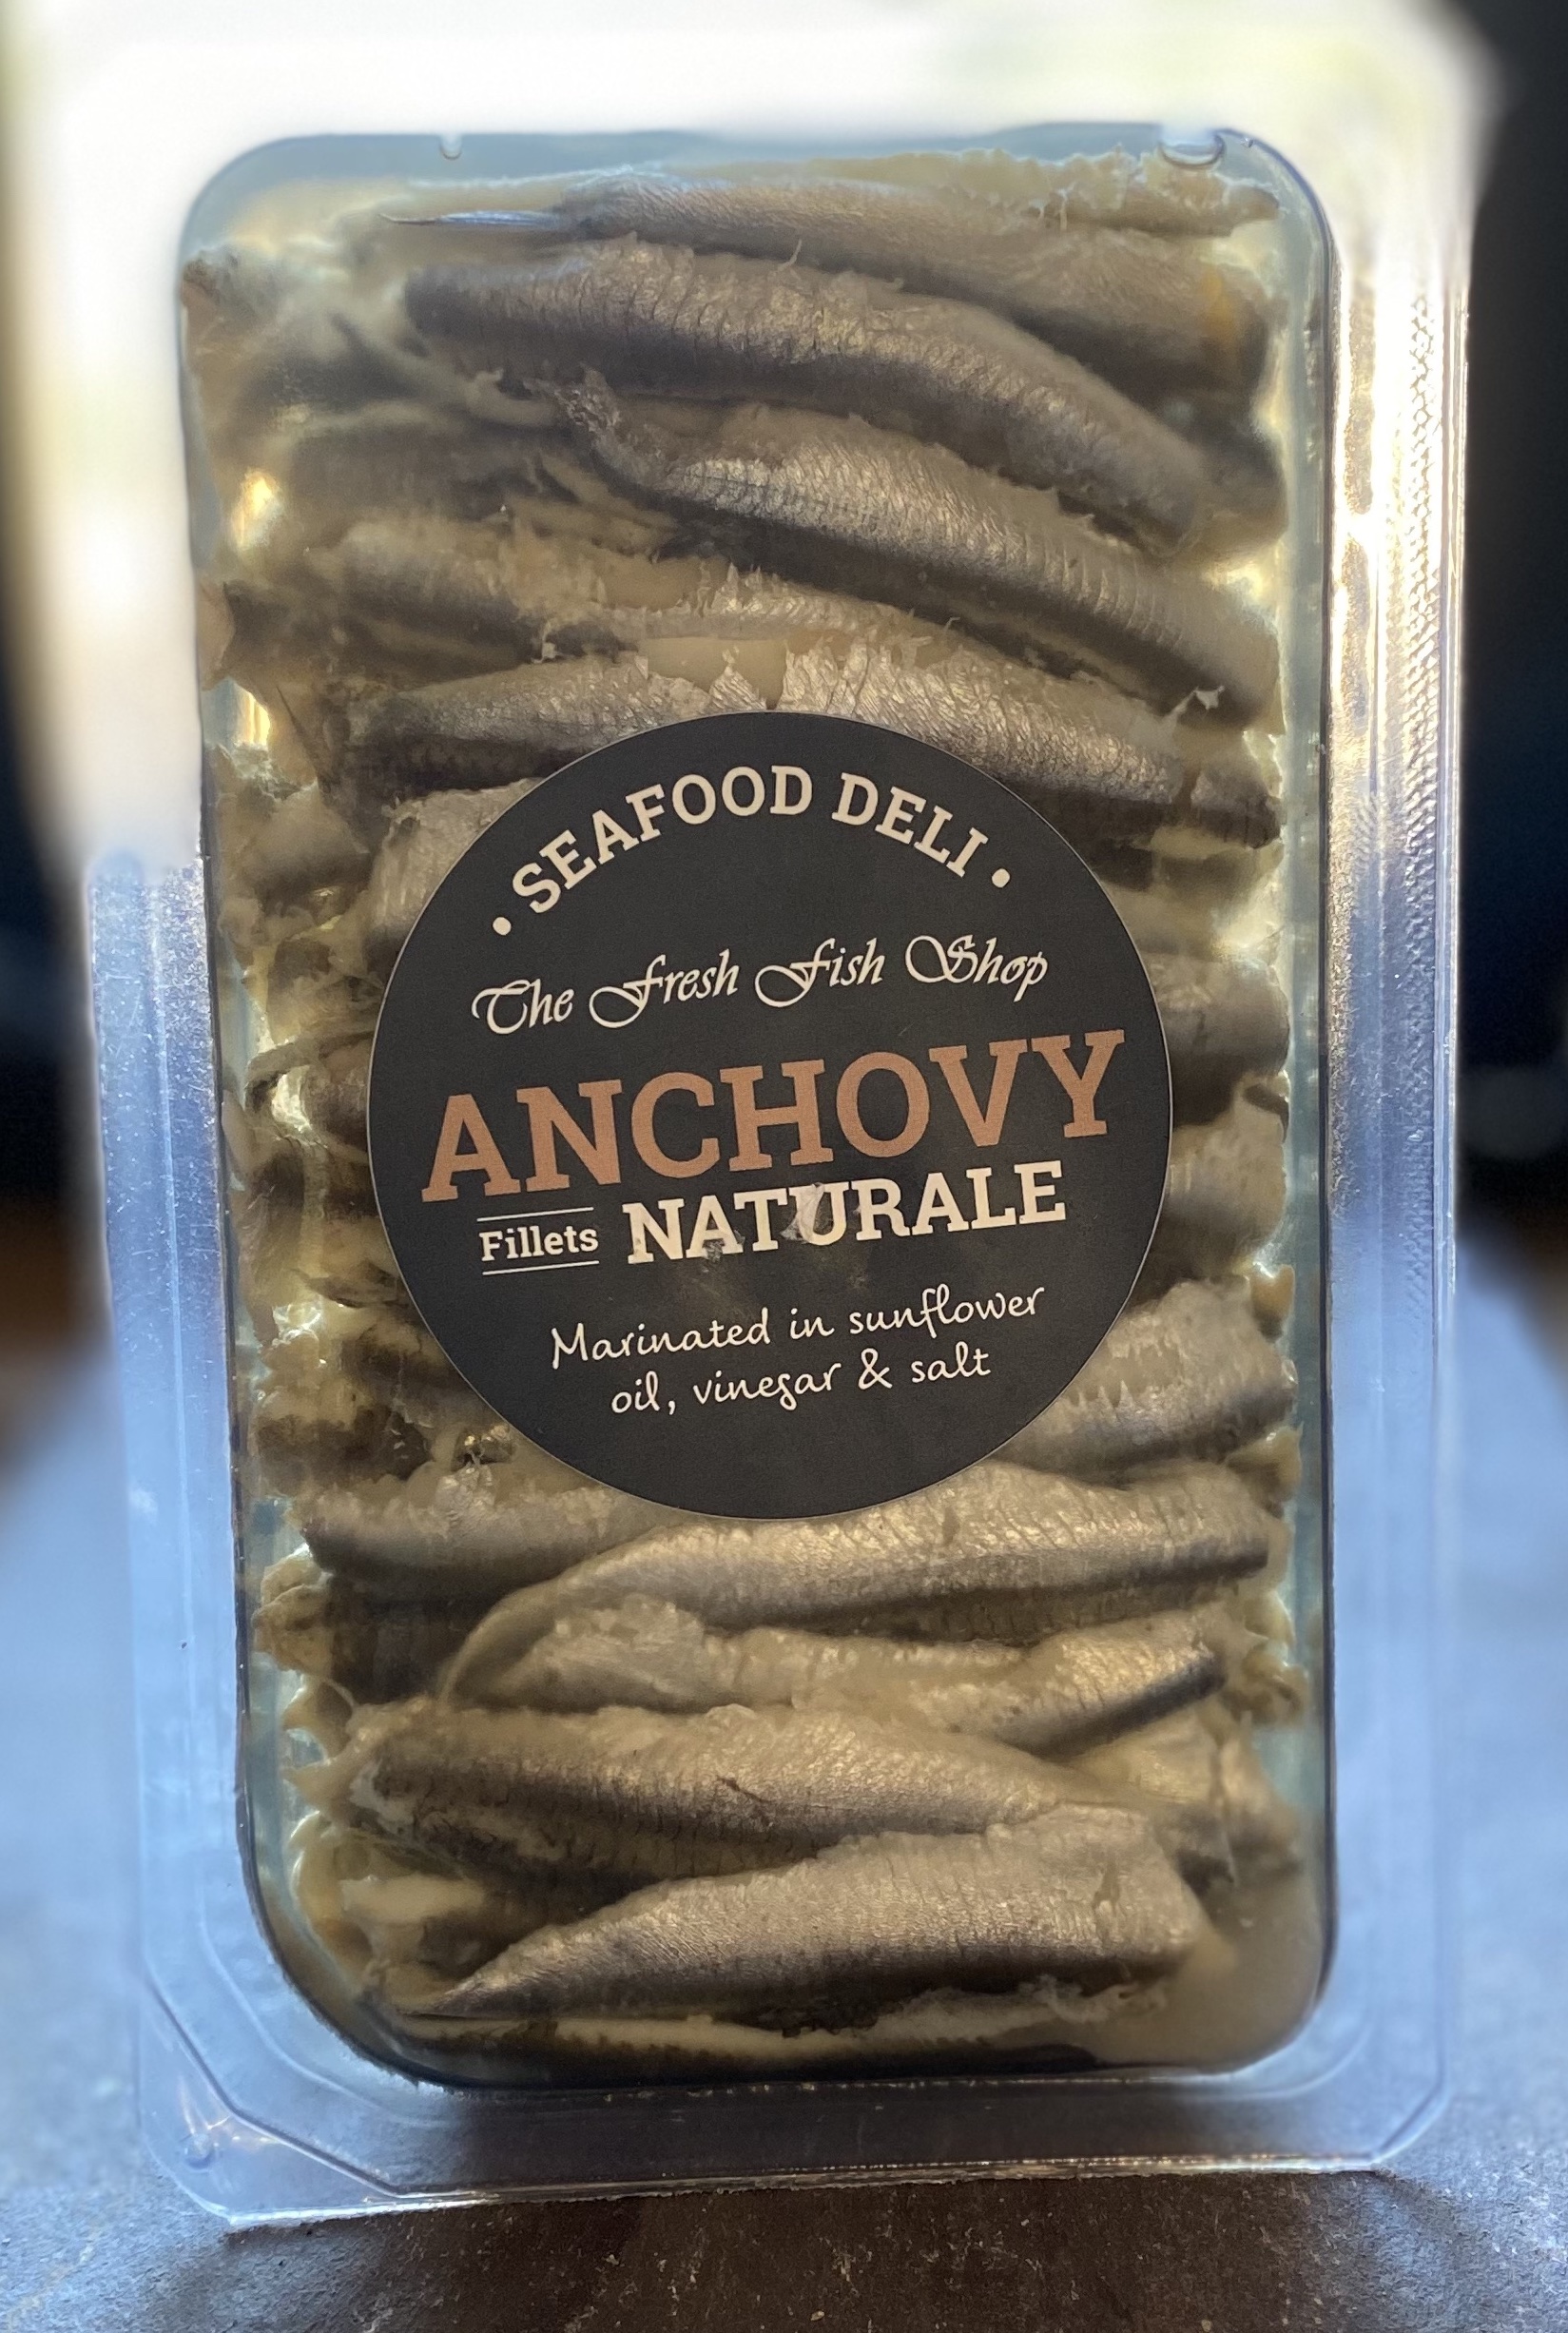 The Fresh Fish Shop - Anchovies in Oil 200g